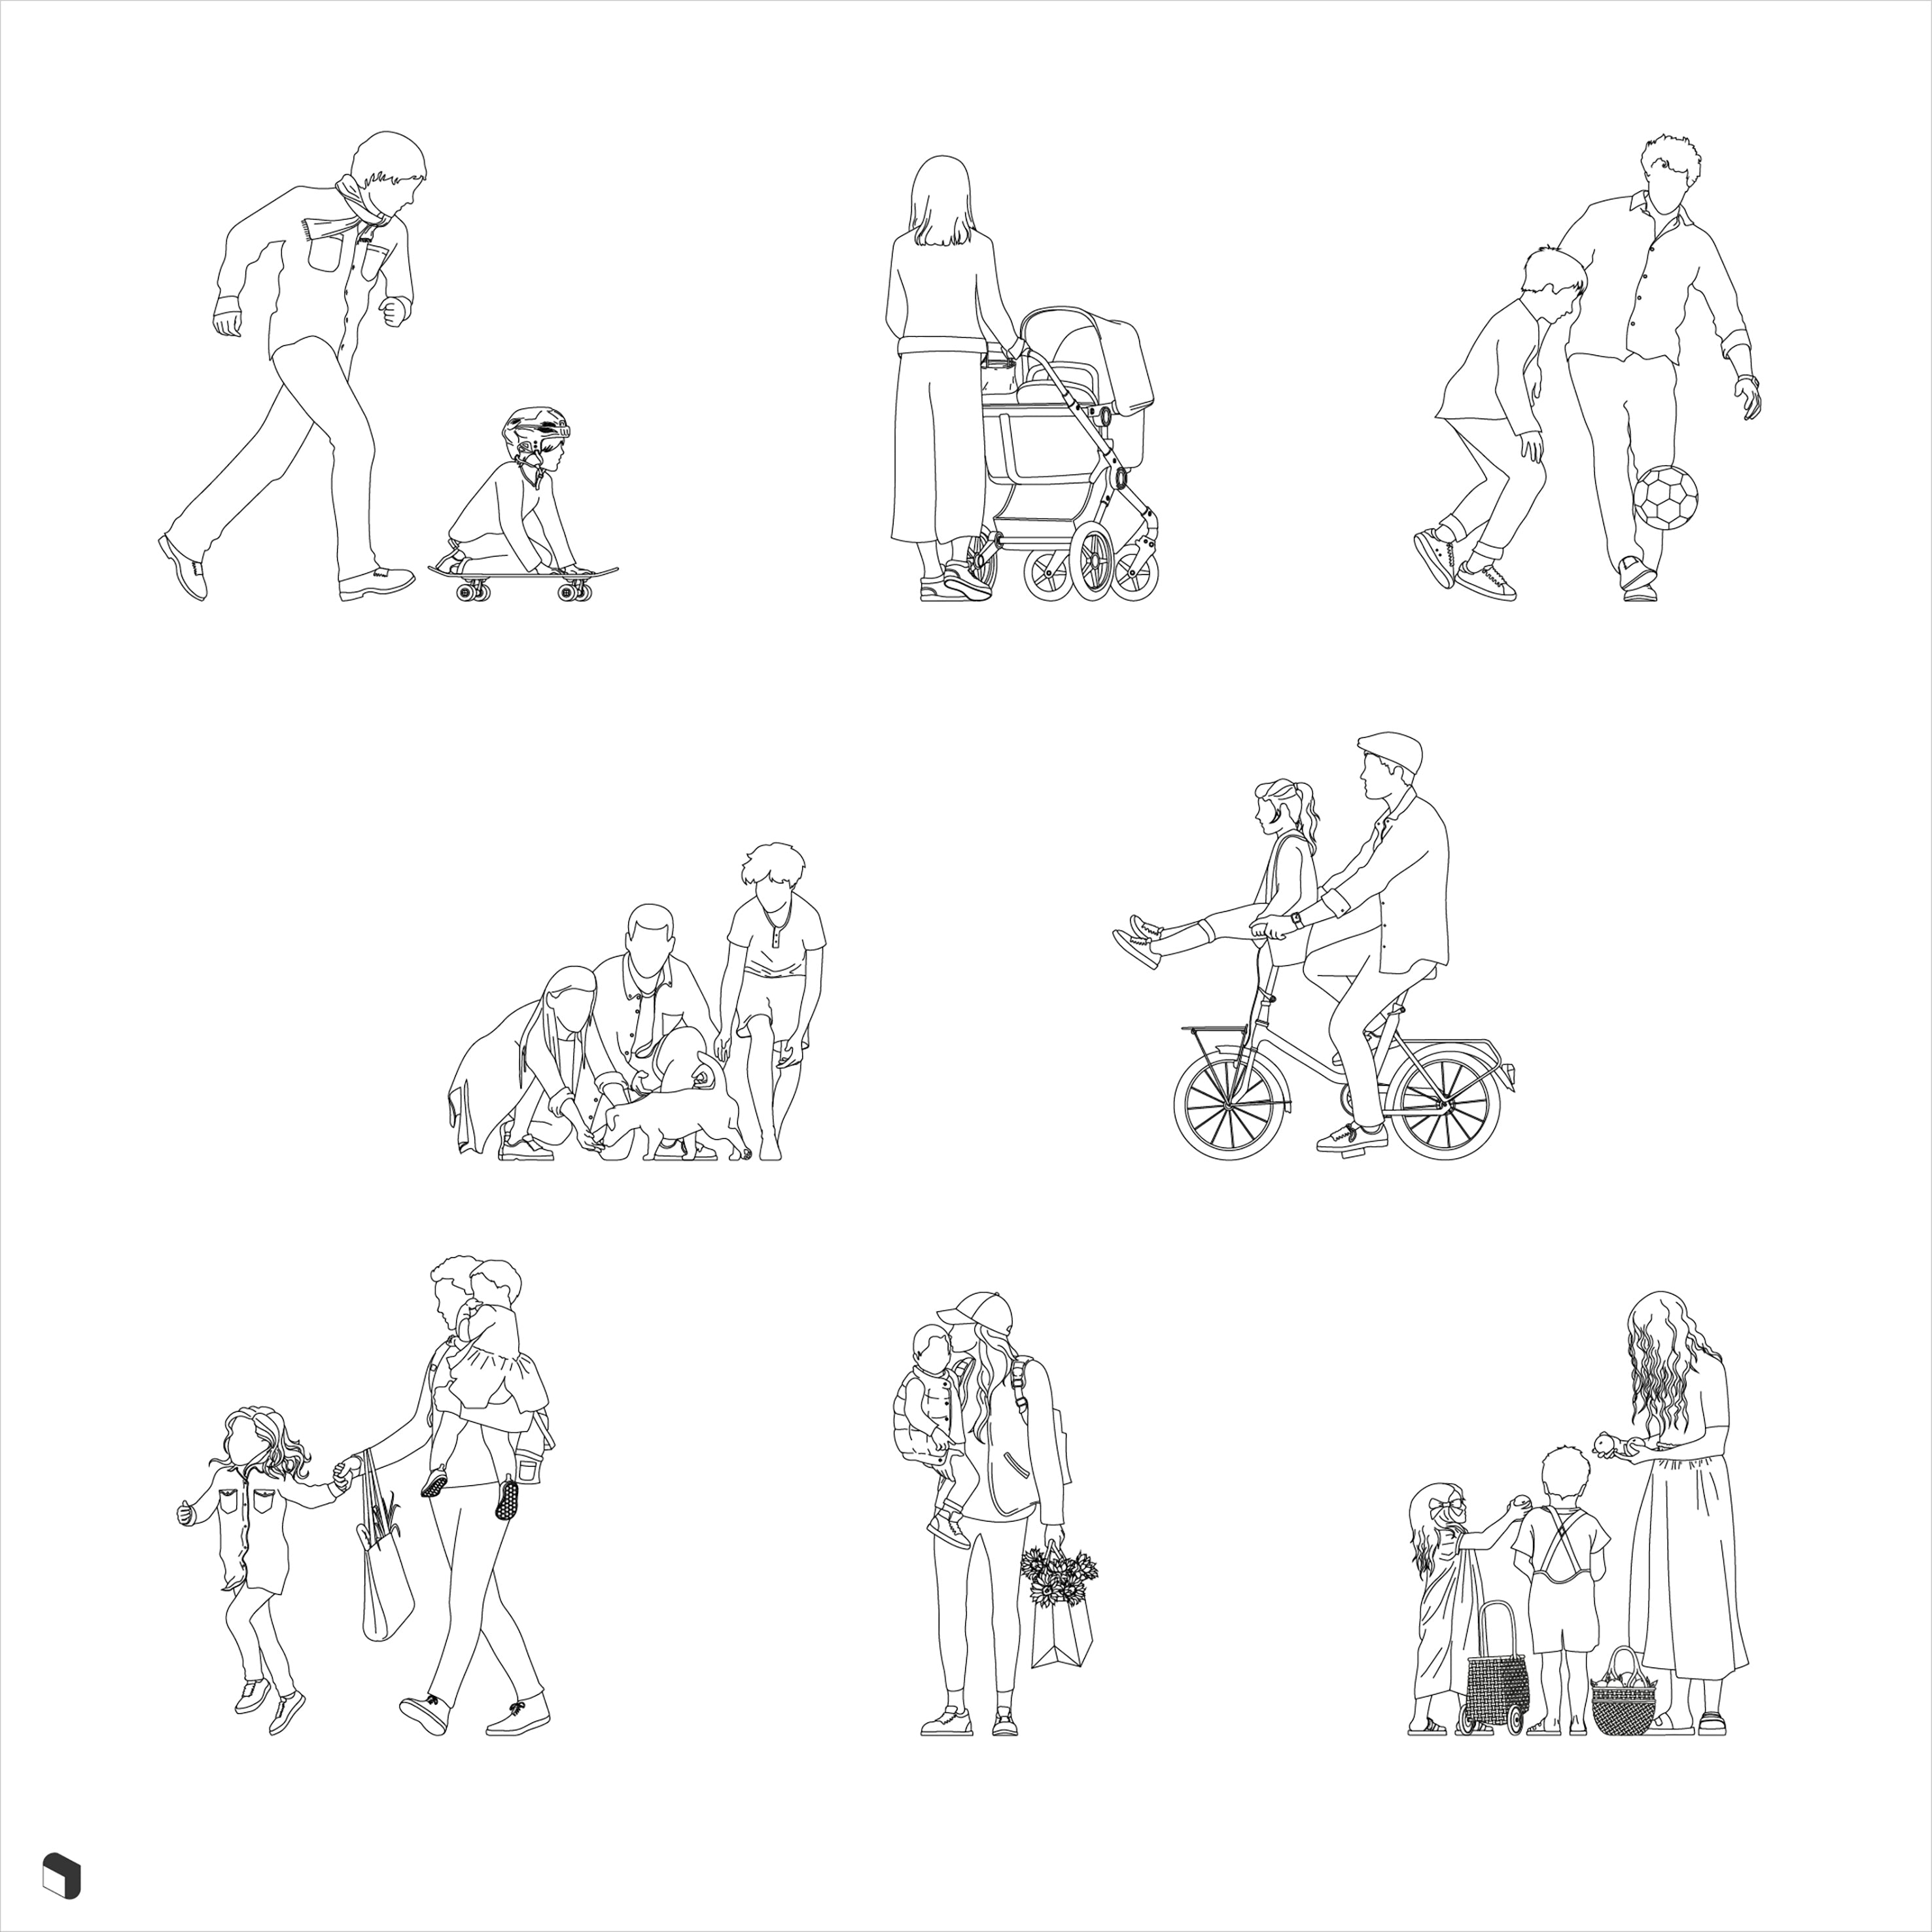 Cad People Families DWG | Toffu Co